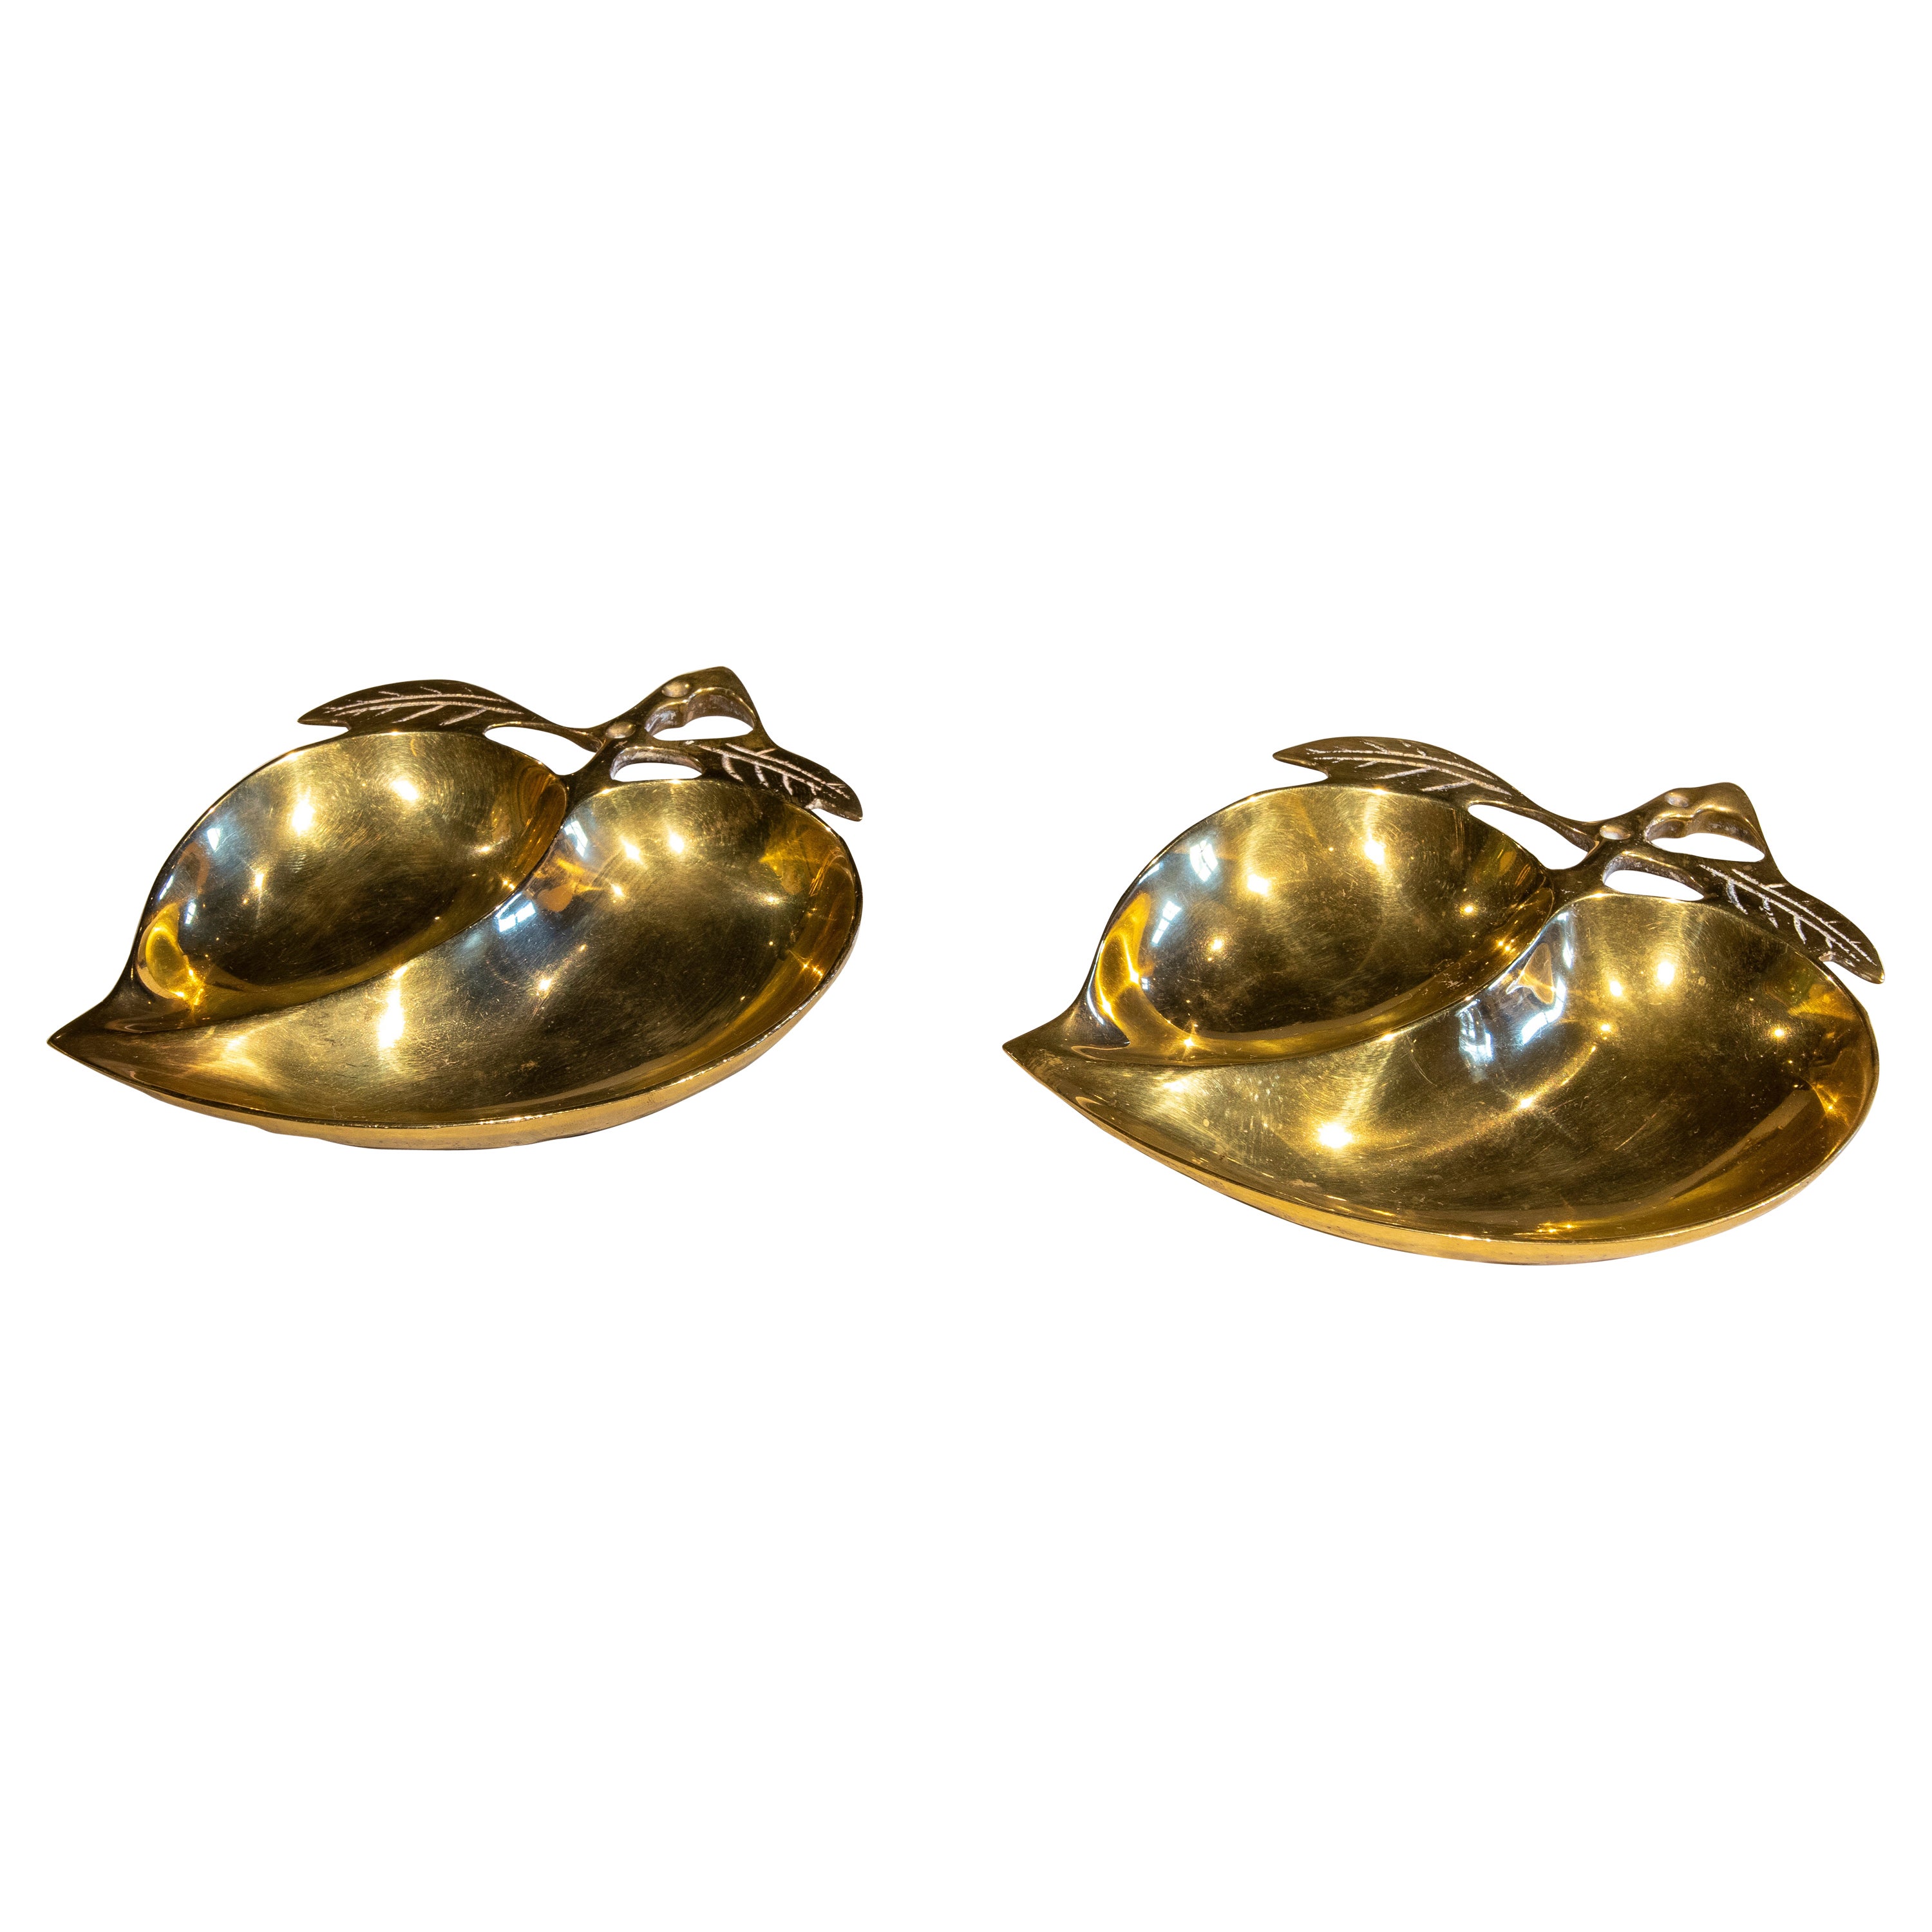 1970s Spanish  Pair of Bronze Apple-Shaped Ashtrays For Sale